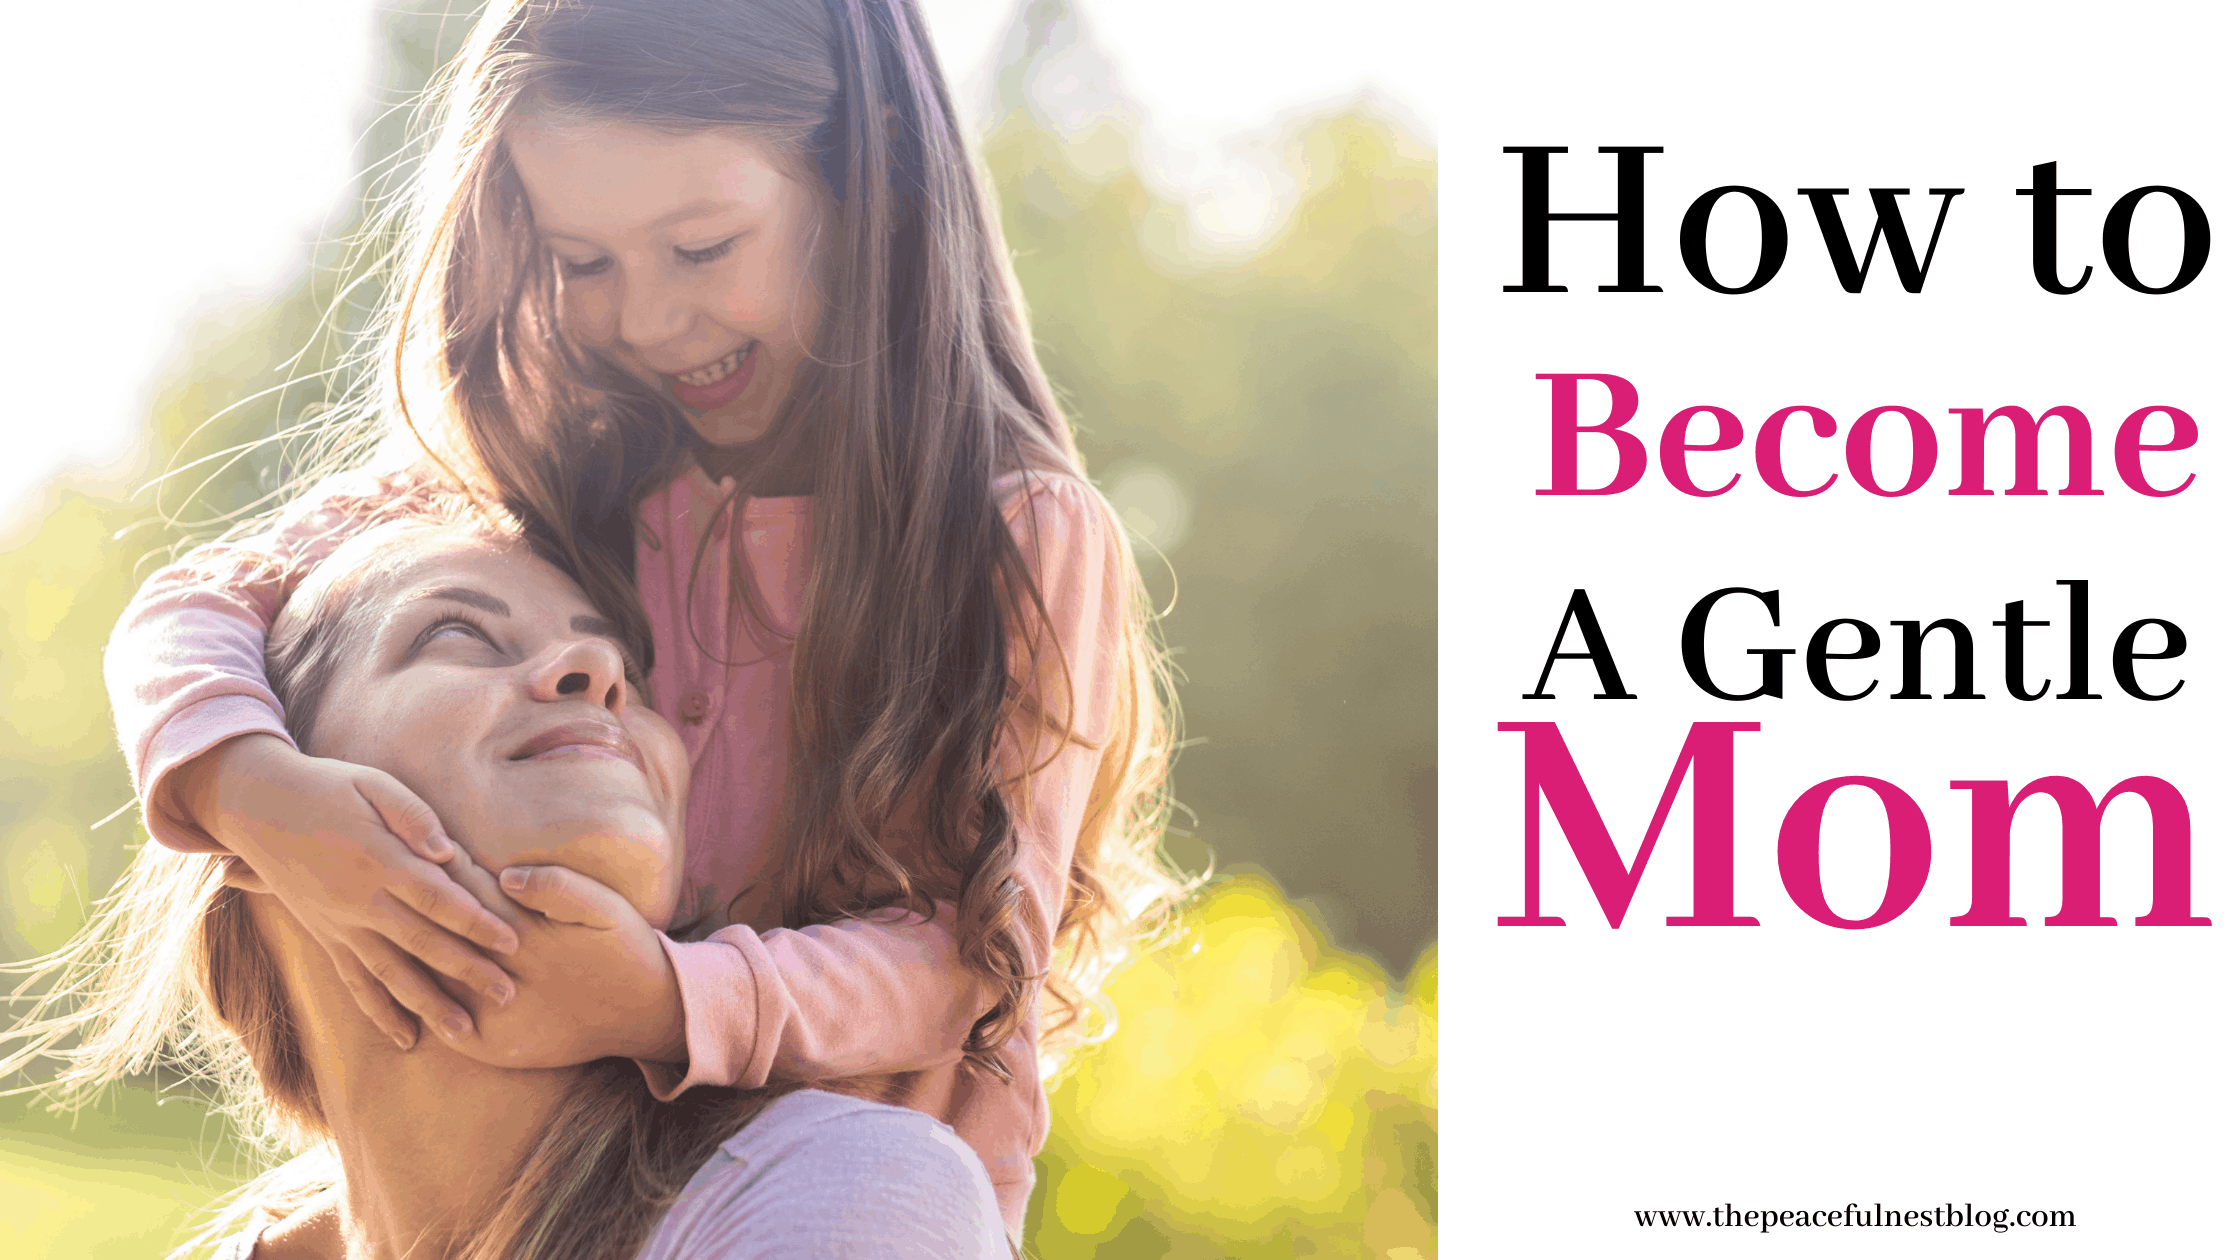 How to Become A Gentle Mom